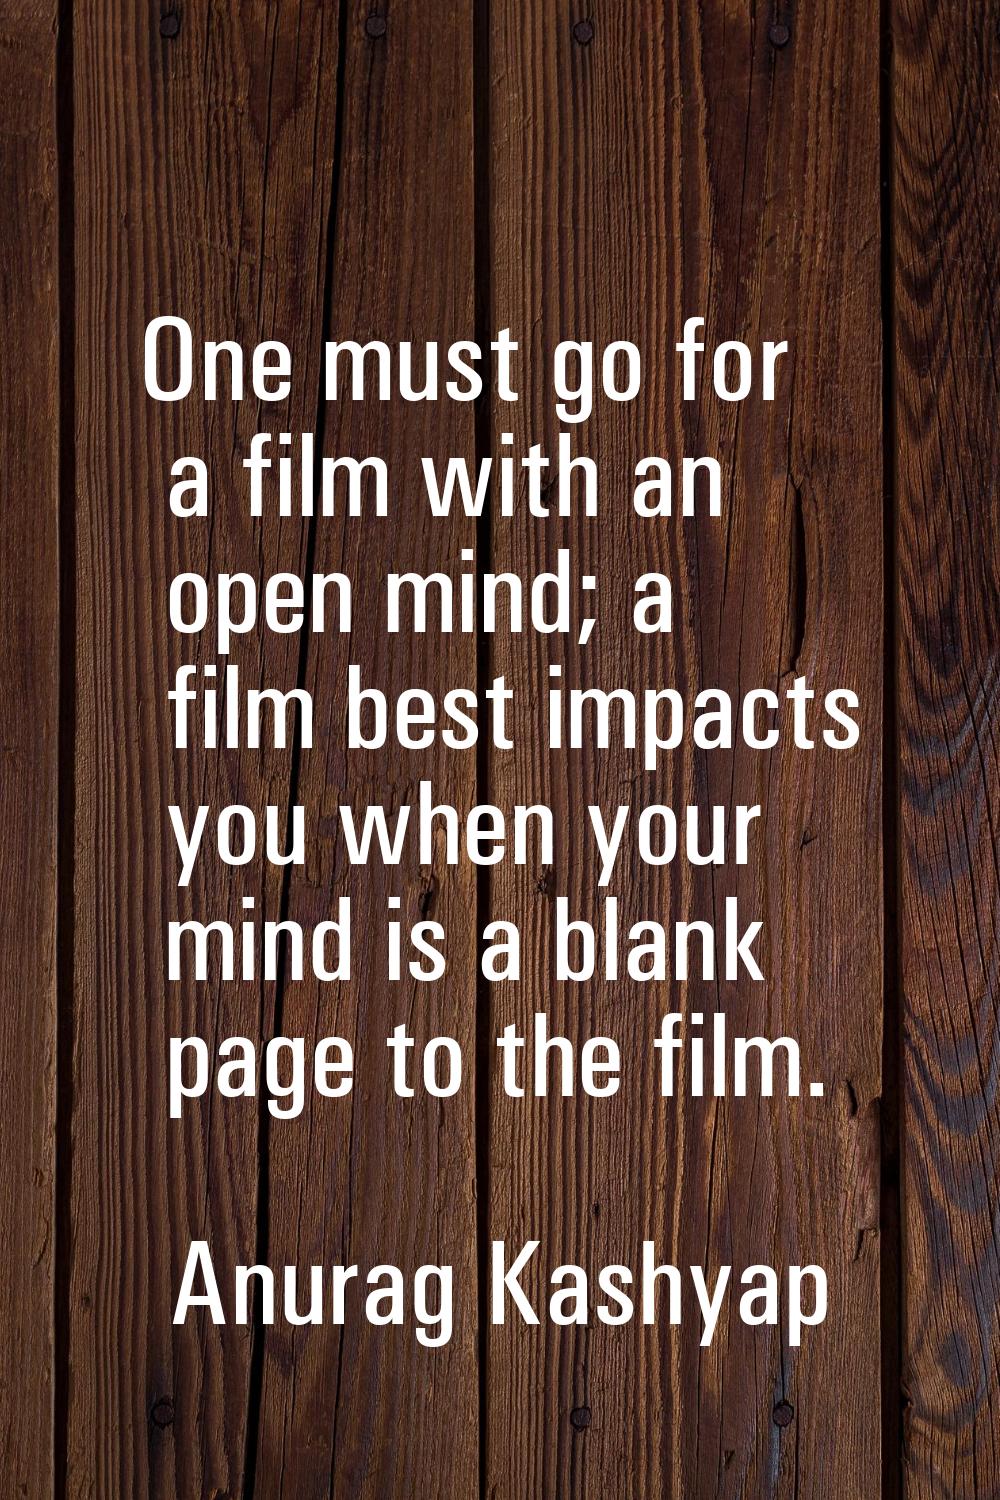 One must go for a film with an open mind; a film best impacts you when your mind is a blank page to